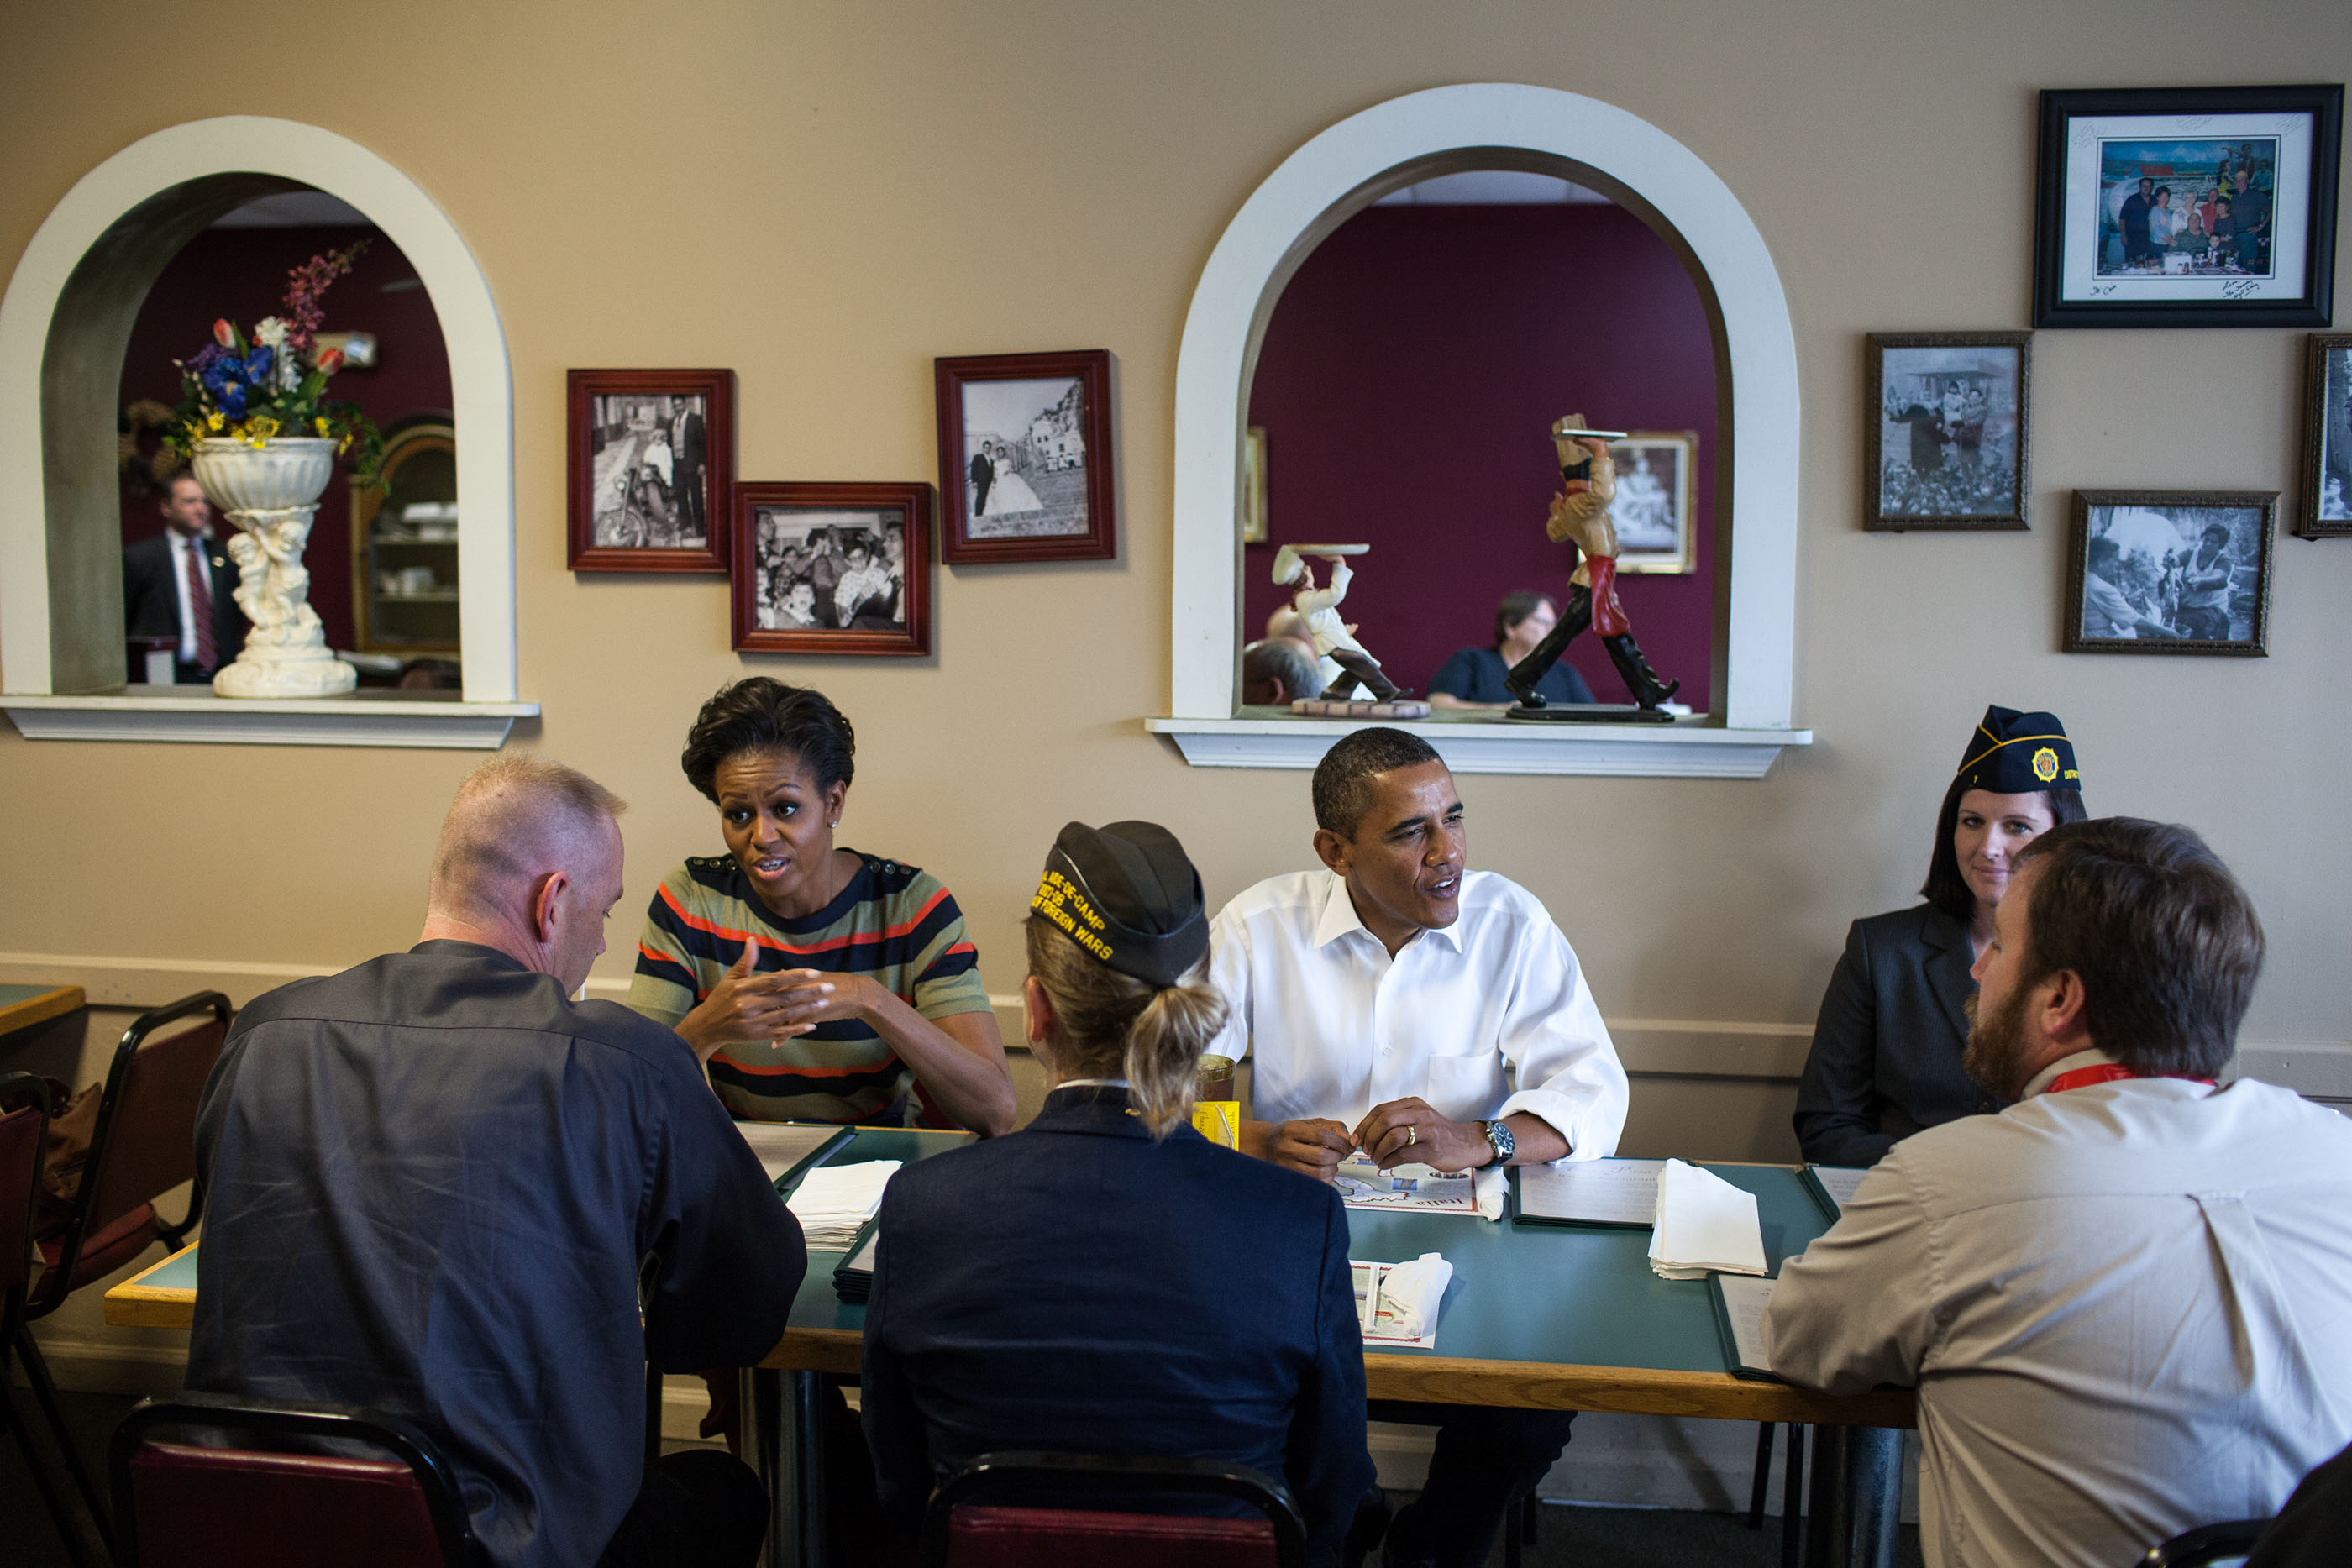 President Barack Obama and First Lady Michelle Obama have lunch with members of military service in Hampton, Va., Oct. 19, 2011. (Official White House Photo by Pete Souza)